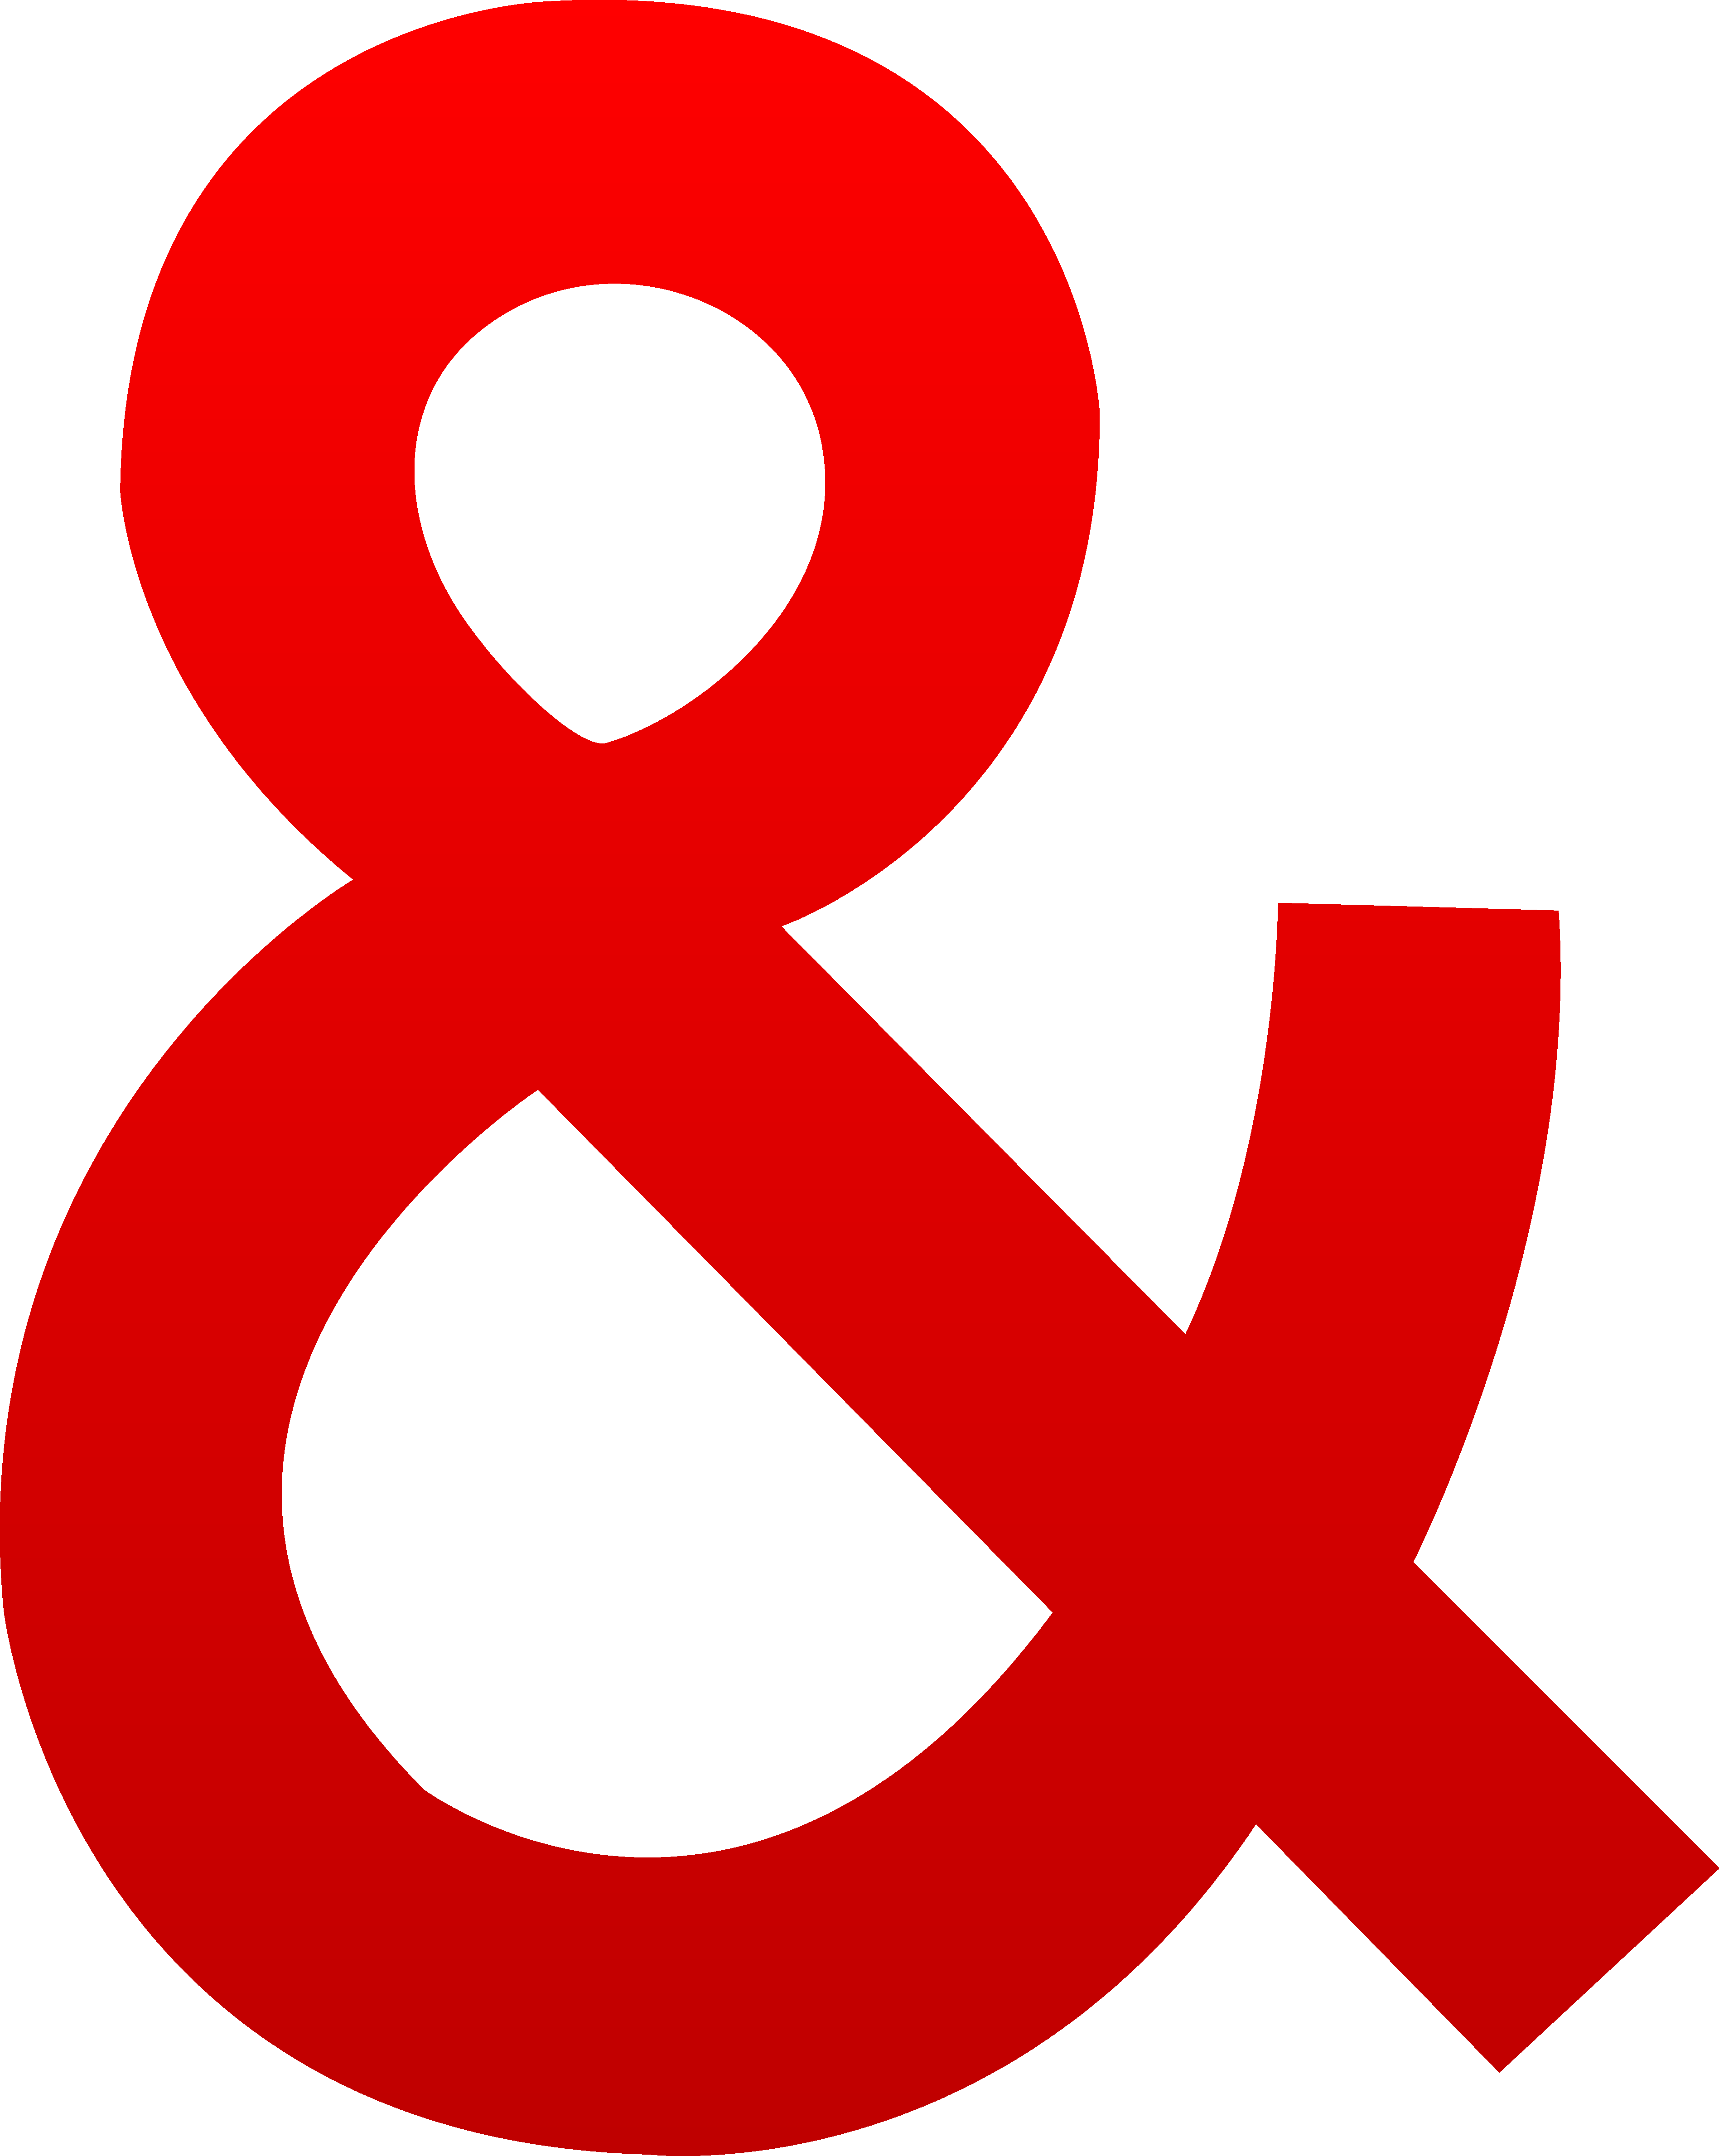 Ampersand cliparts 